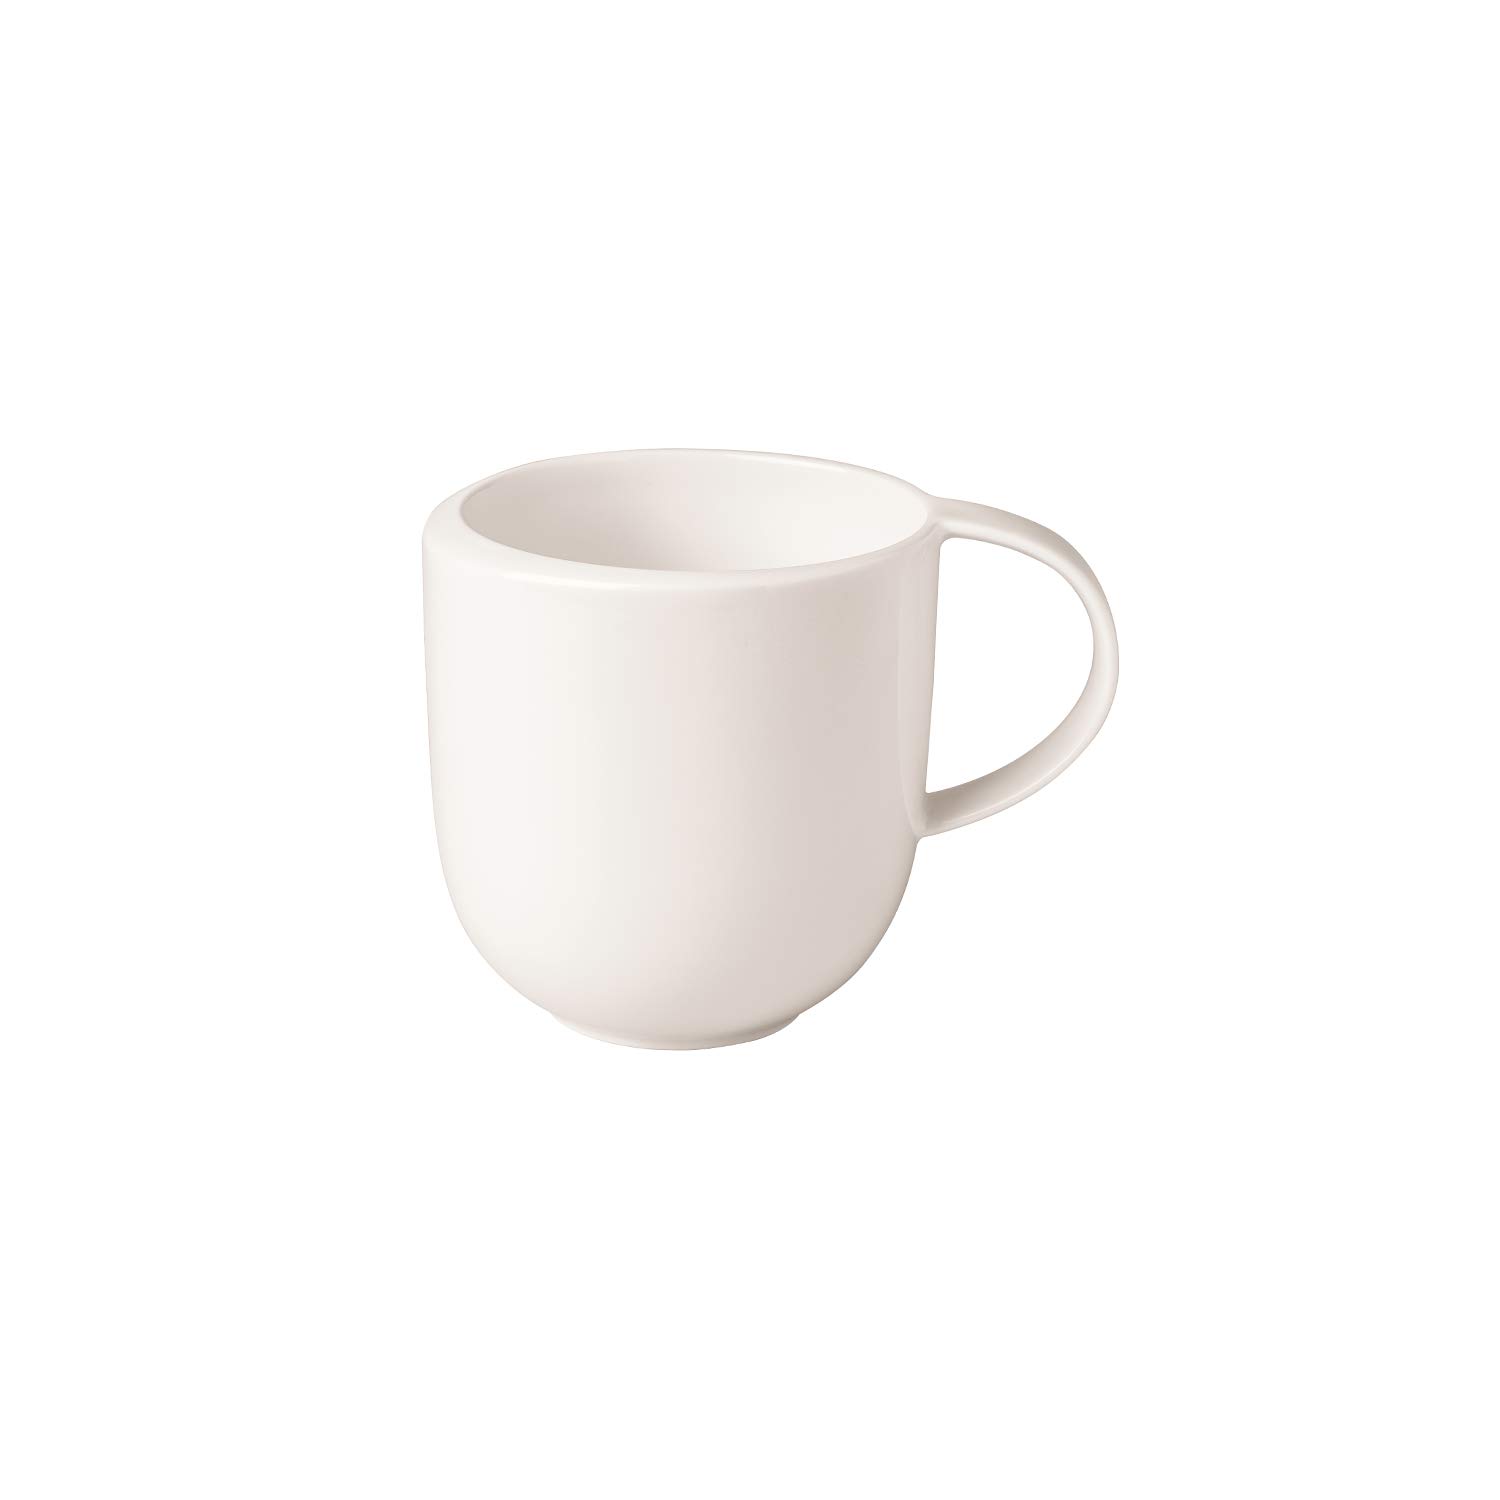 Villeroy & Boch - NewMoon mug with handle, modern cup for tea and coffee, premium porcelain, white, dishwasher safe